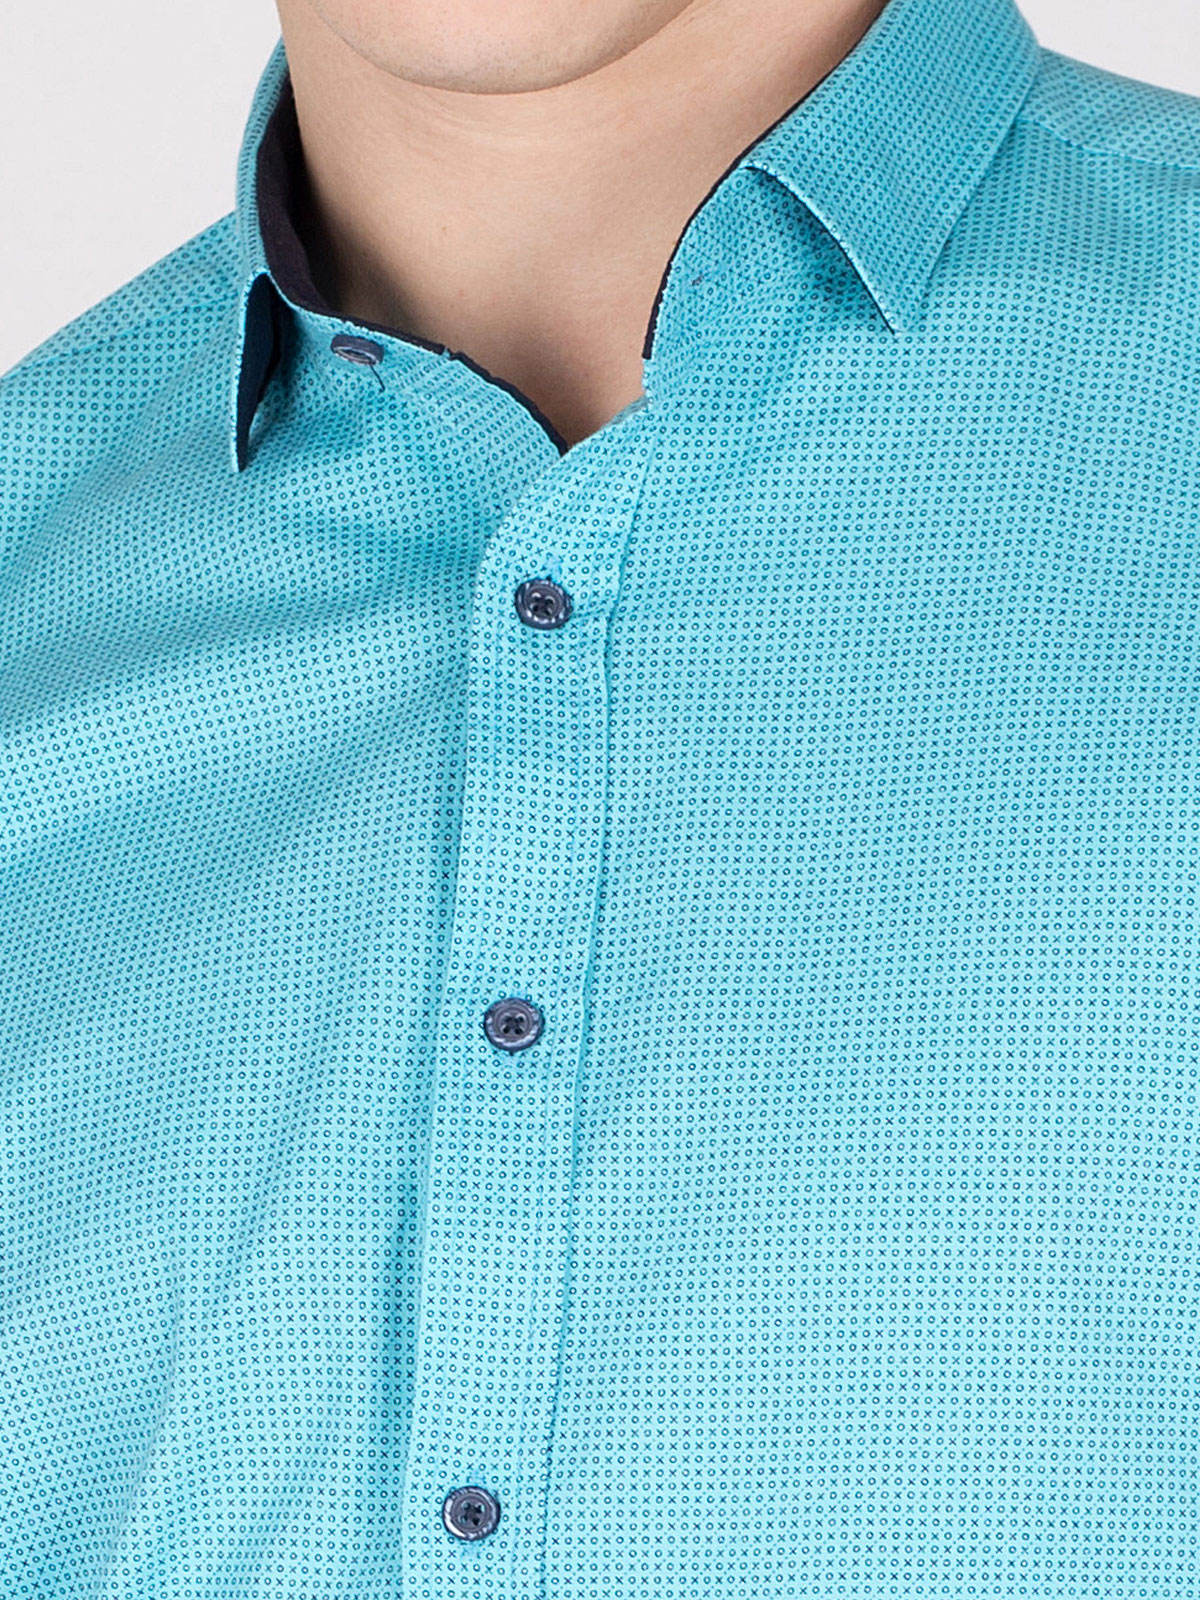 Turquoise shirt with small figures - 21457 € 30.93 img2